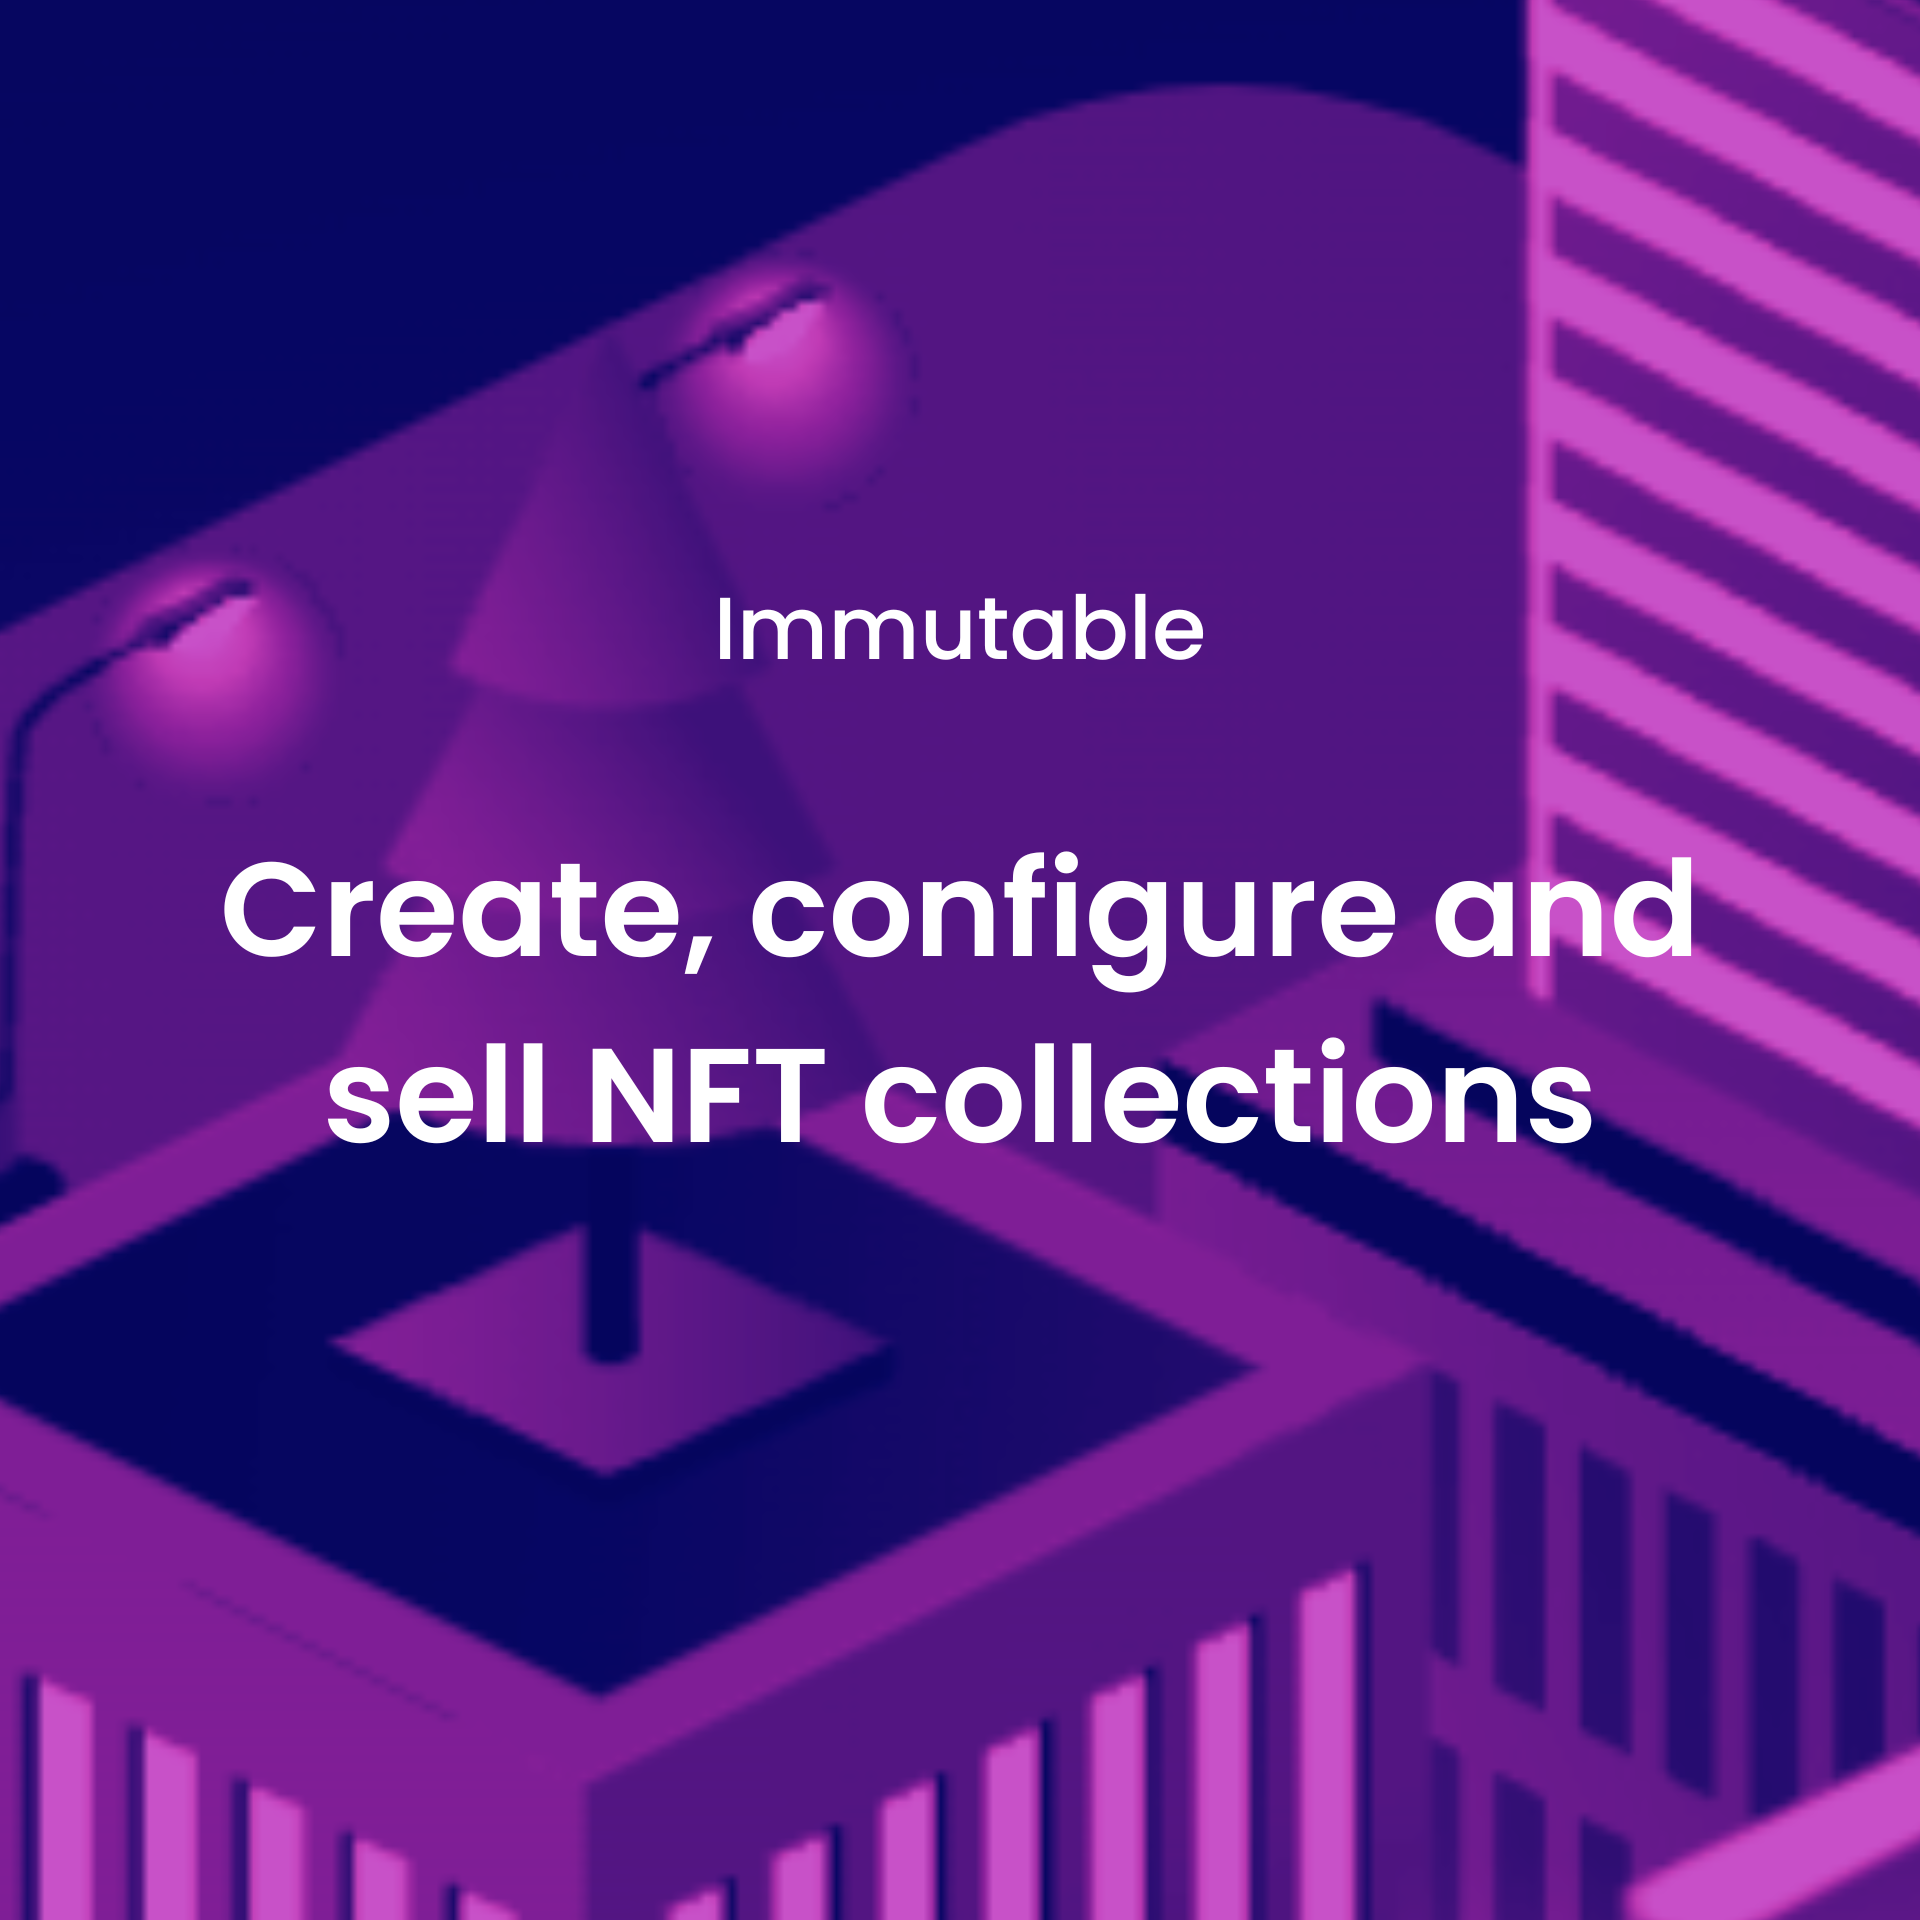 Create, configure and sell NFT collections on ImmutableX